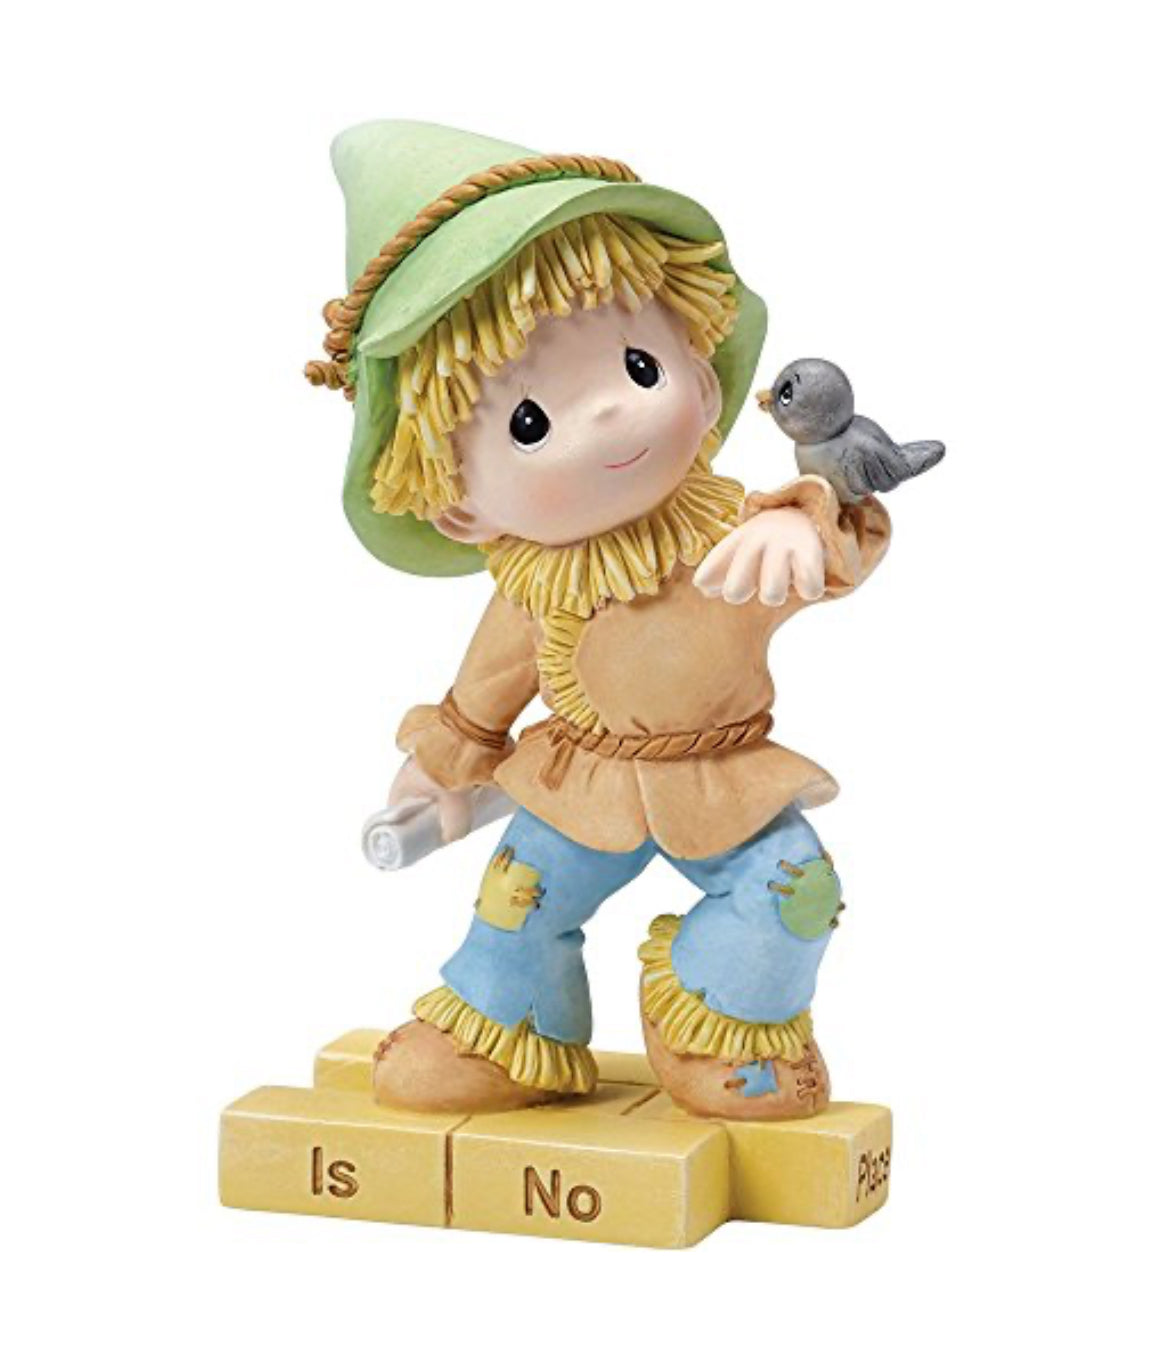 Scarecrow There Is No Place Like Home - Precious Moments Resin Figurine